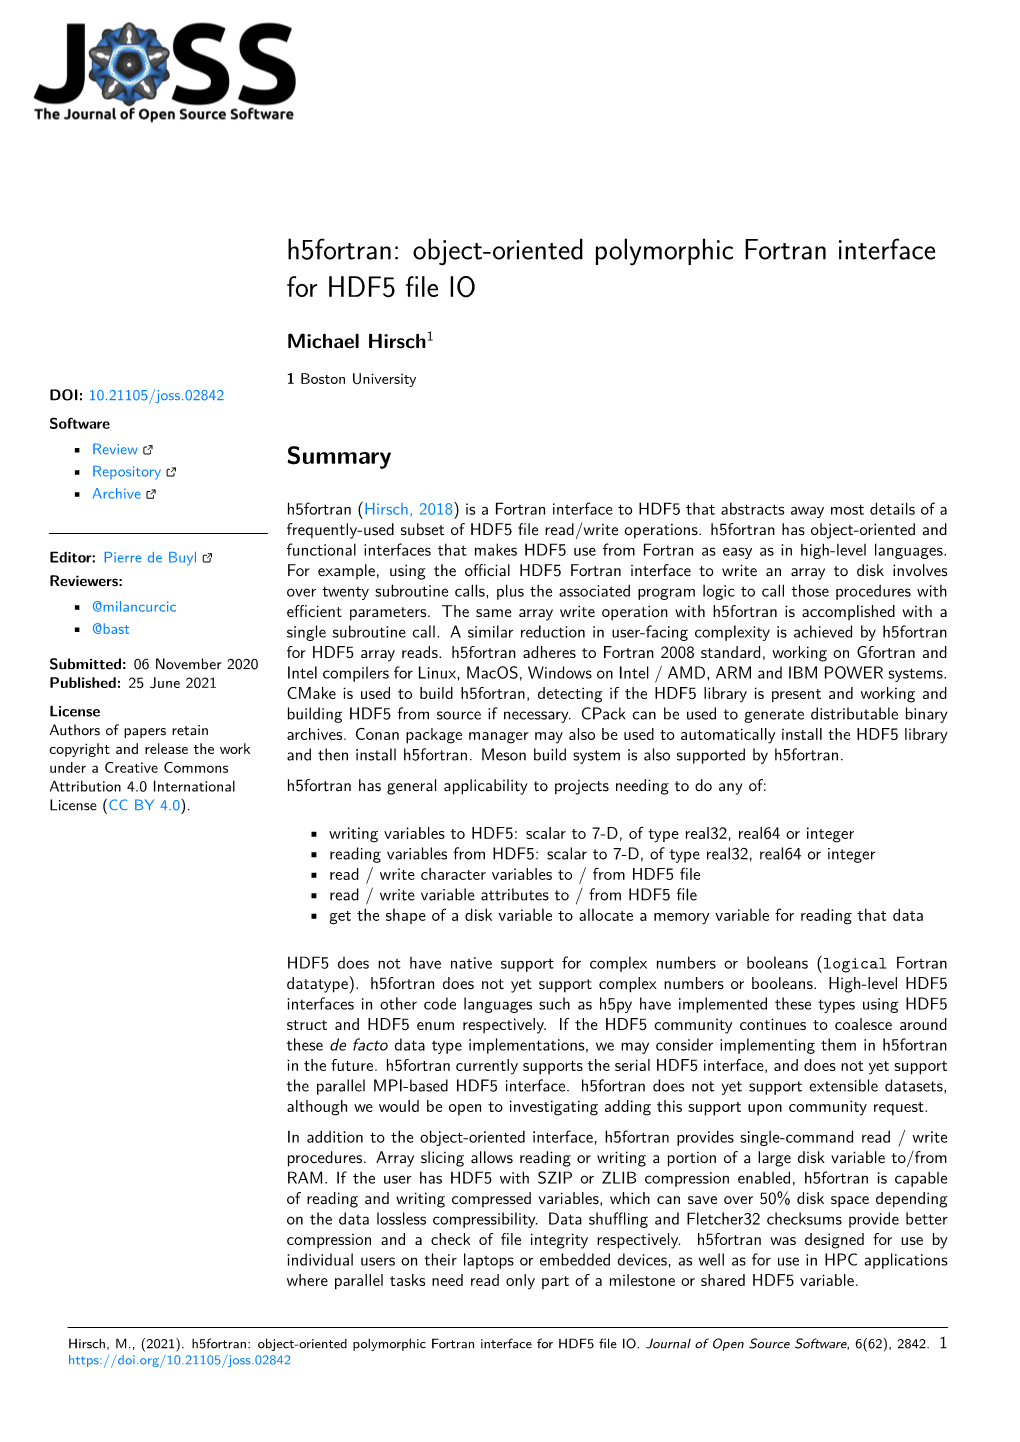 Object-Oriented Polymorphic Fortran Interface for HDF5 File IO